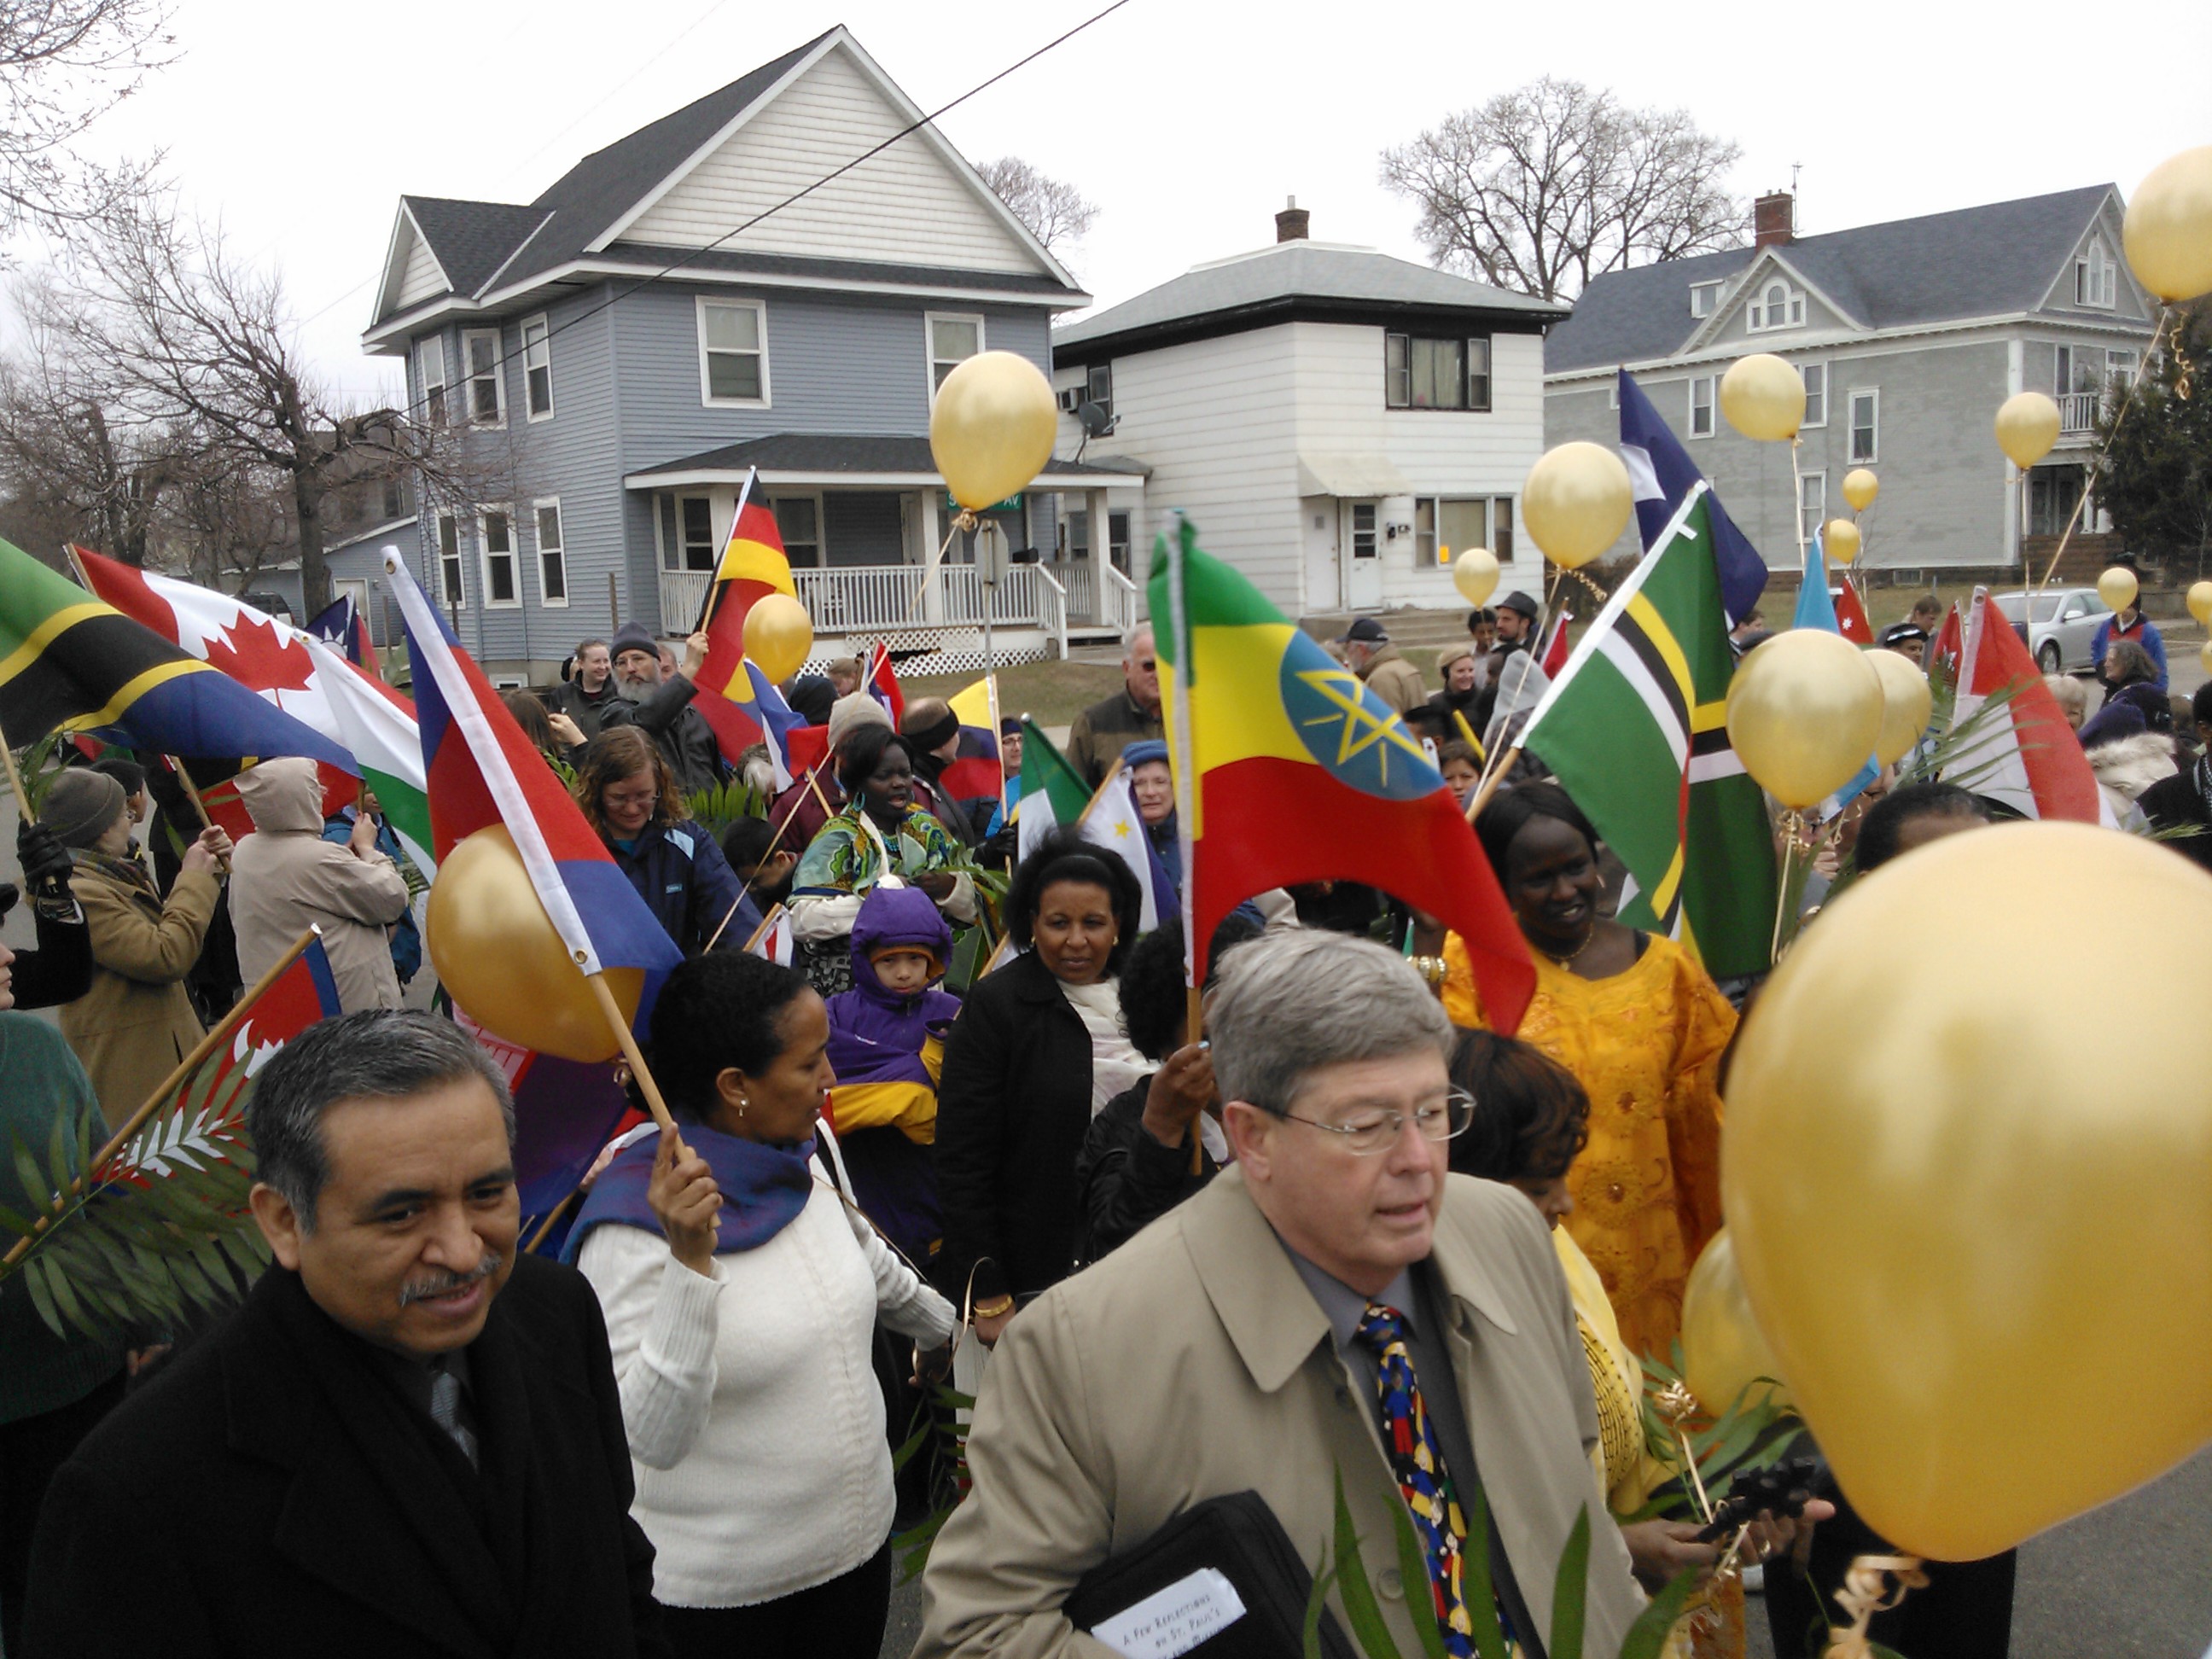 Reverend Roland Wells (Center) helps to lead the colorful march.